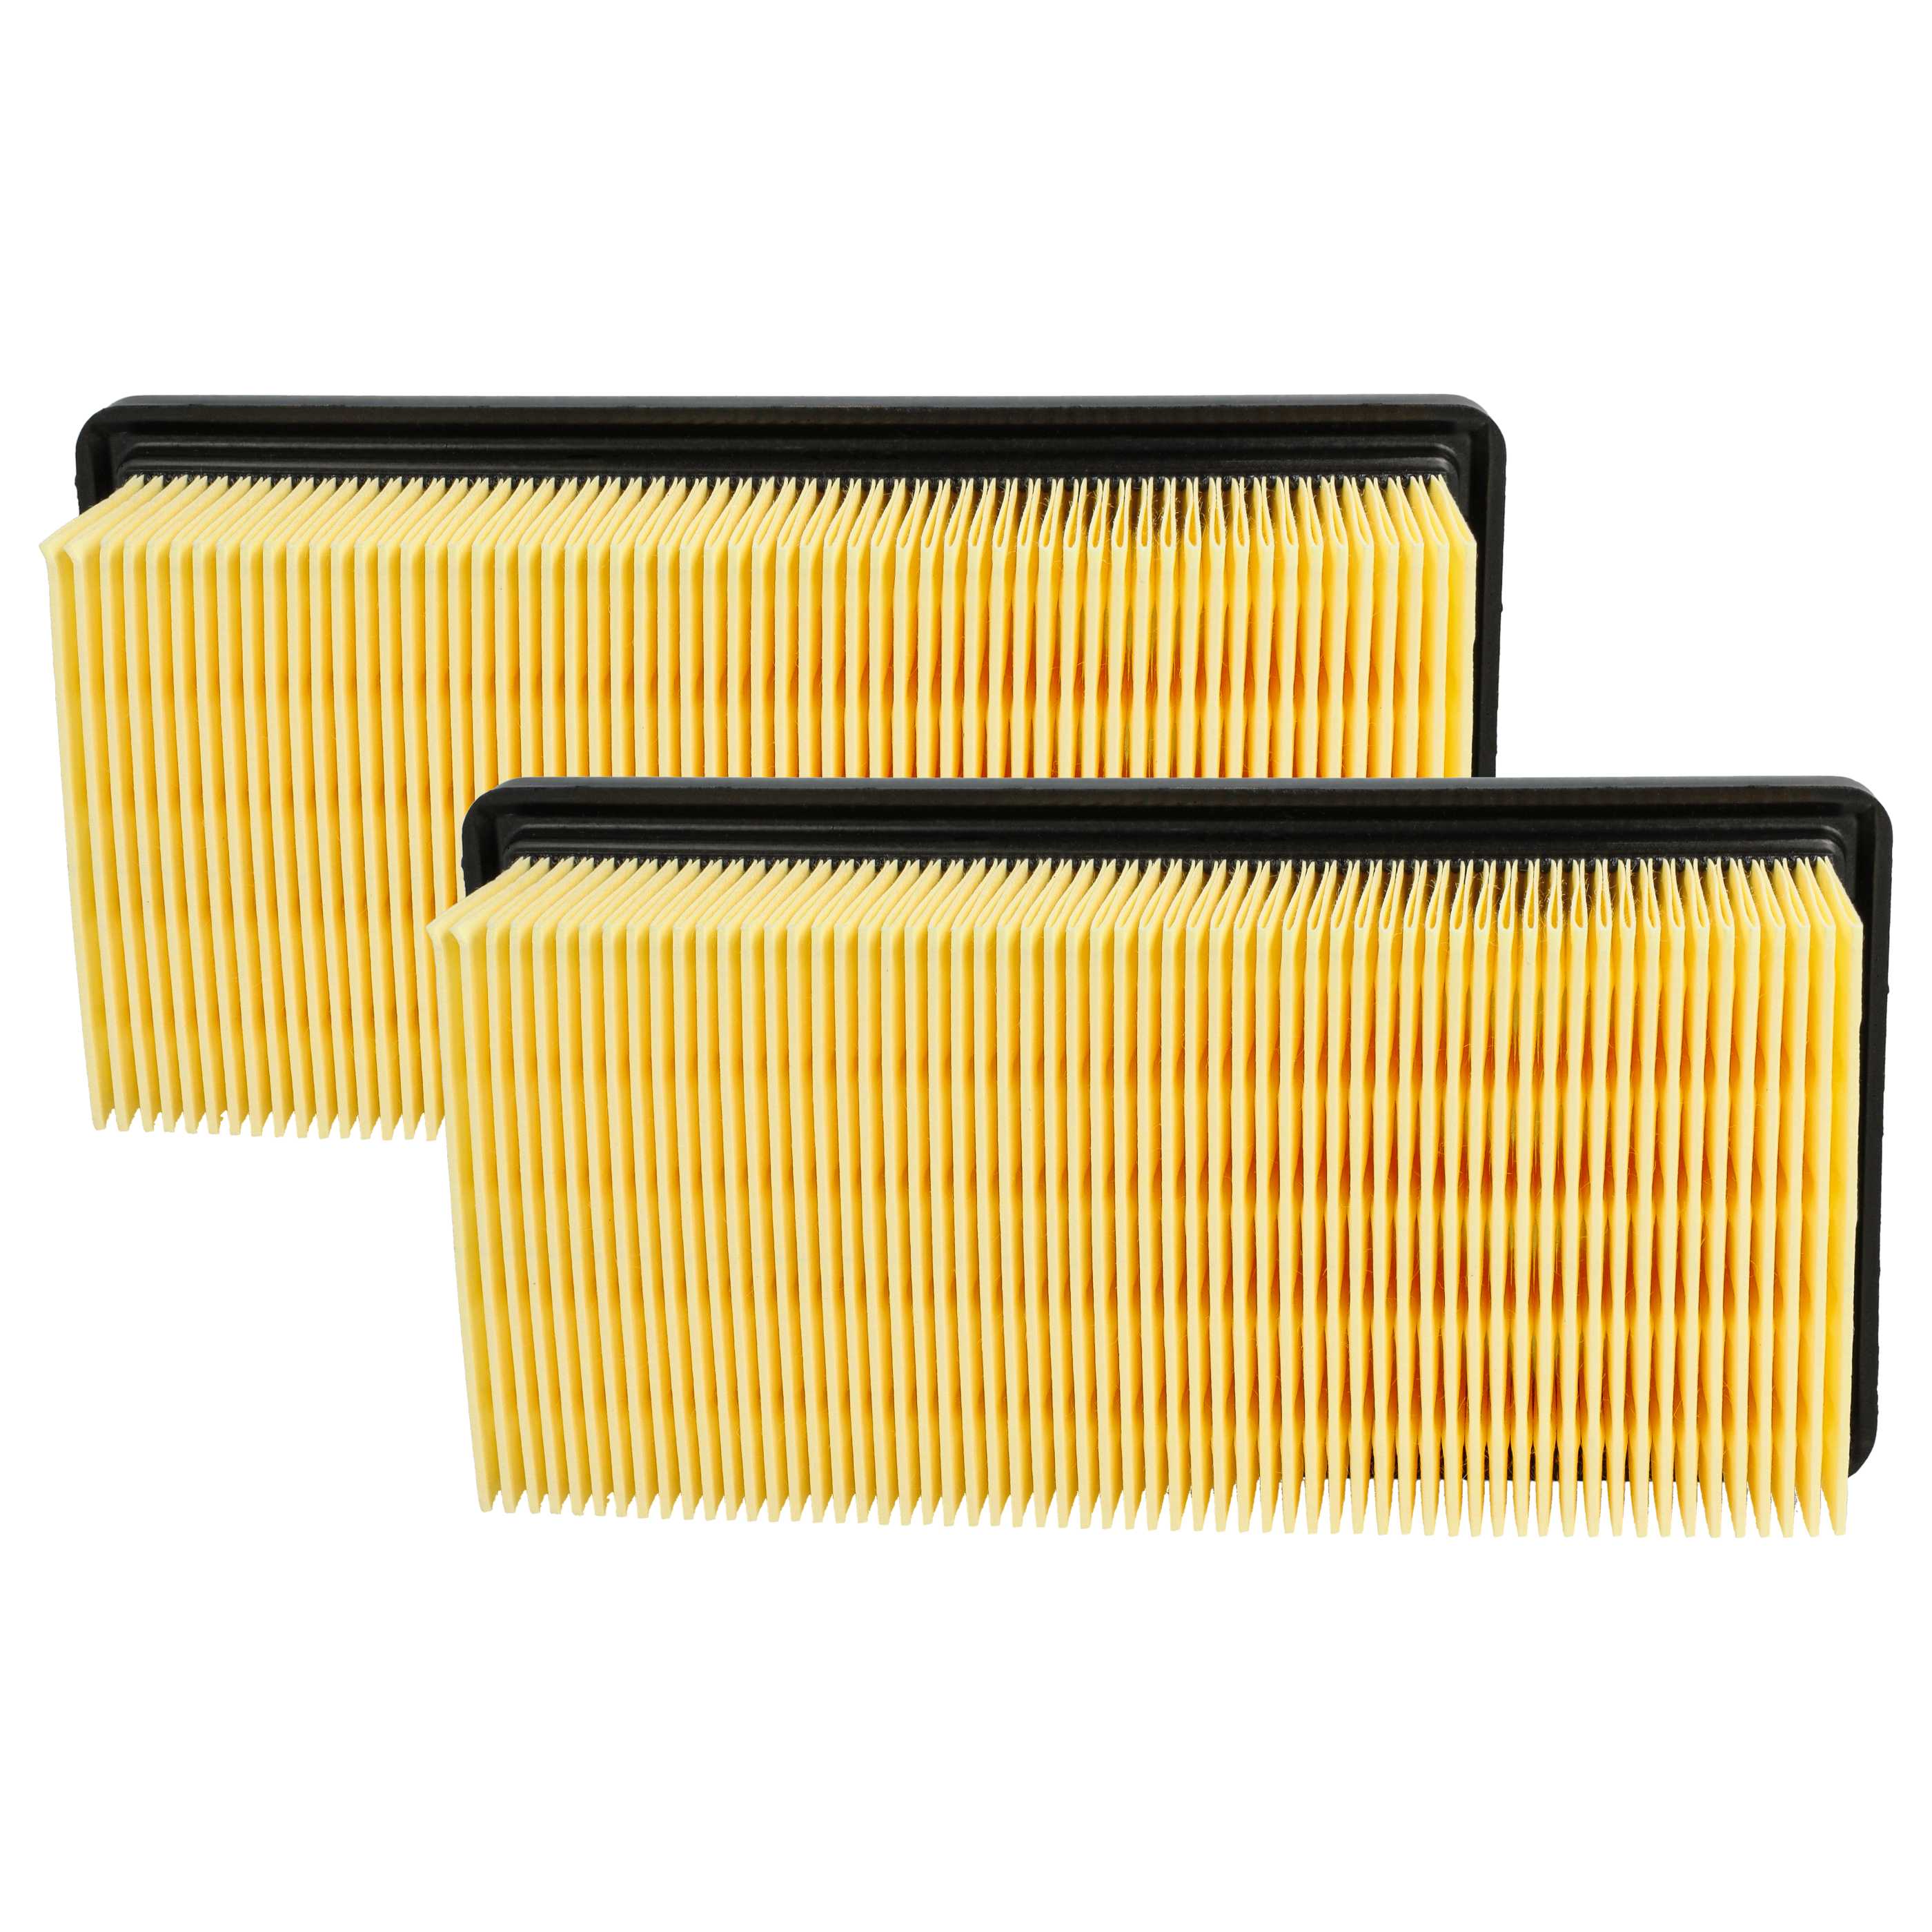 2x flat pleated filter replaces Kärcher 6.414-971.0 for Kärcher Vacuum Cleaner